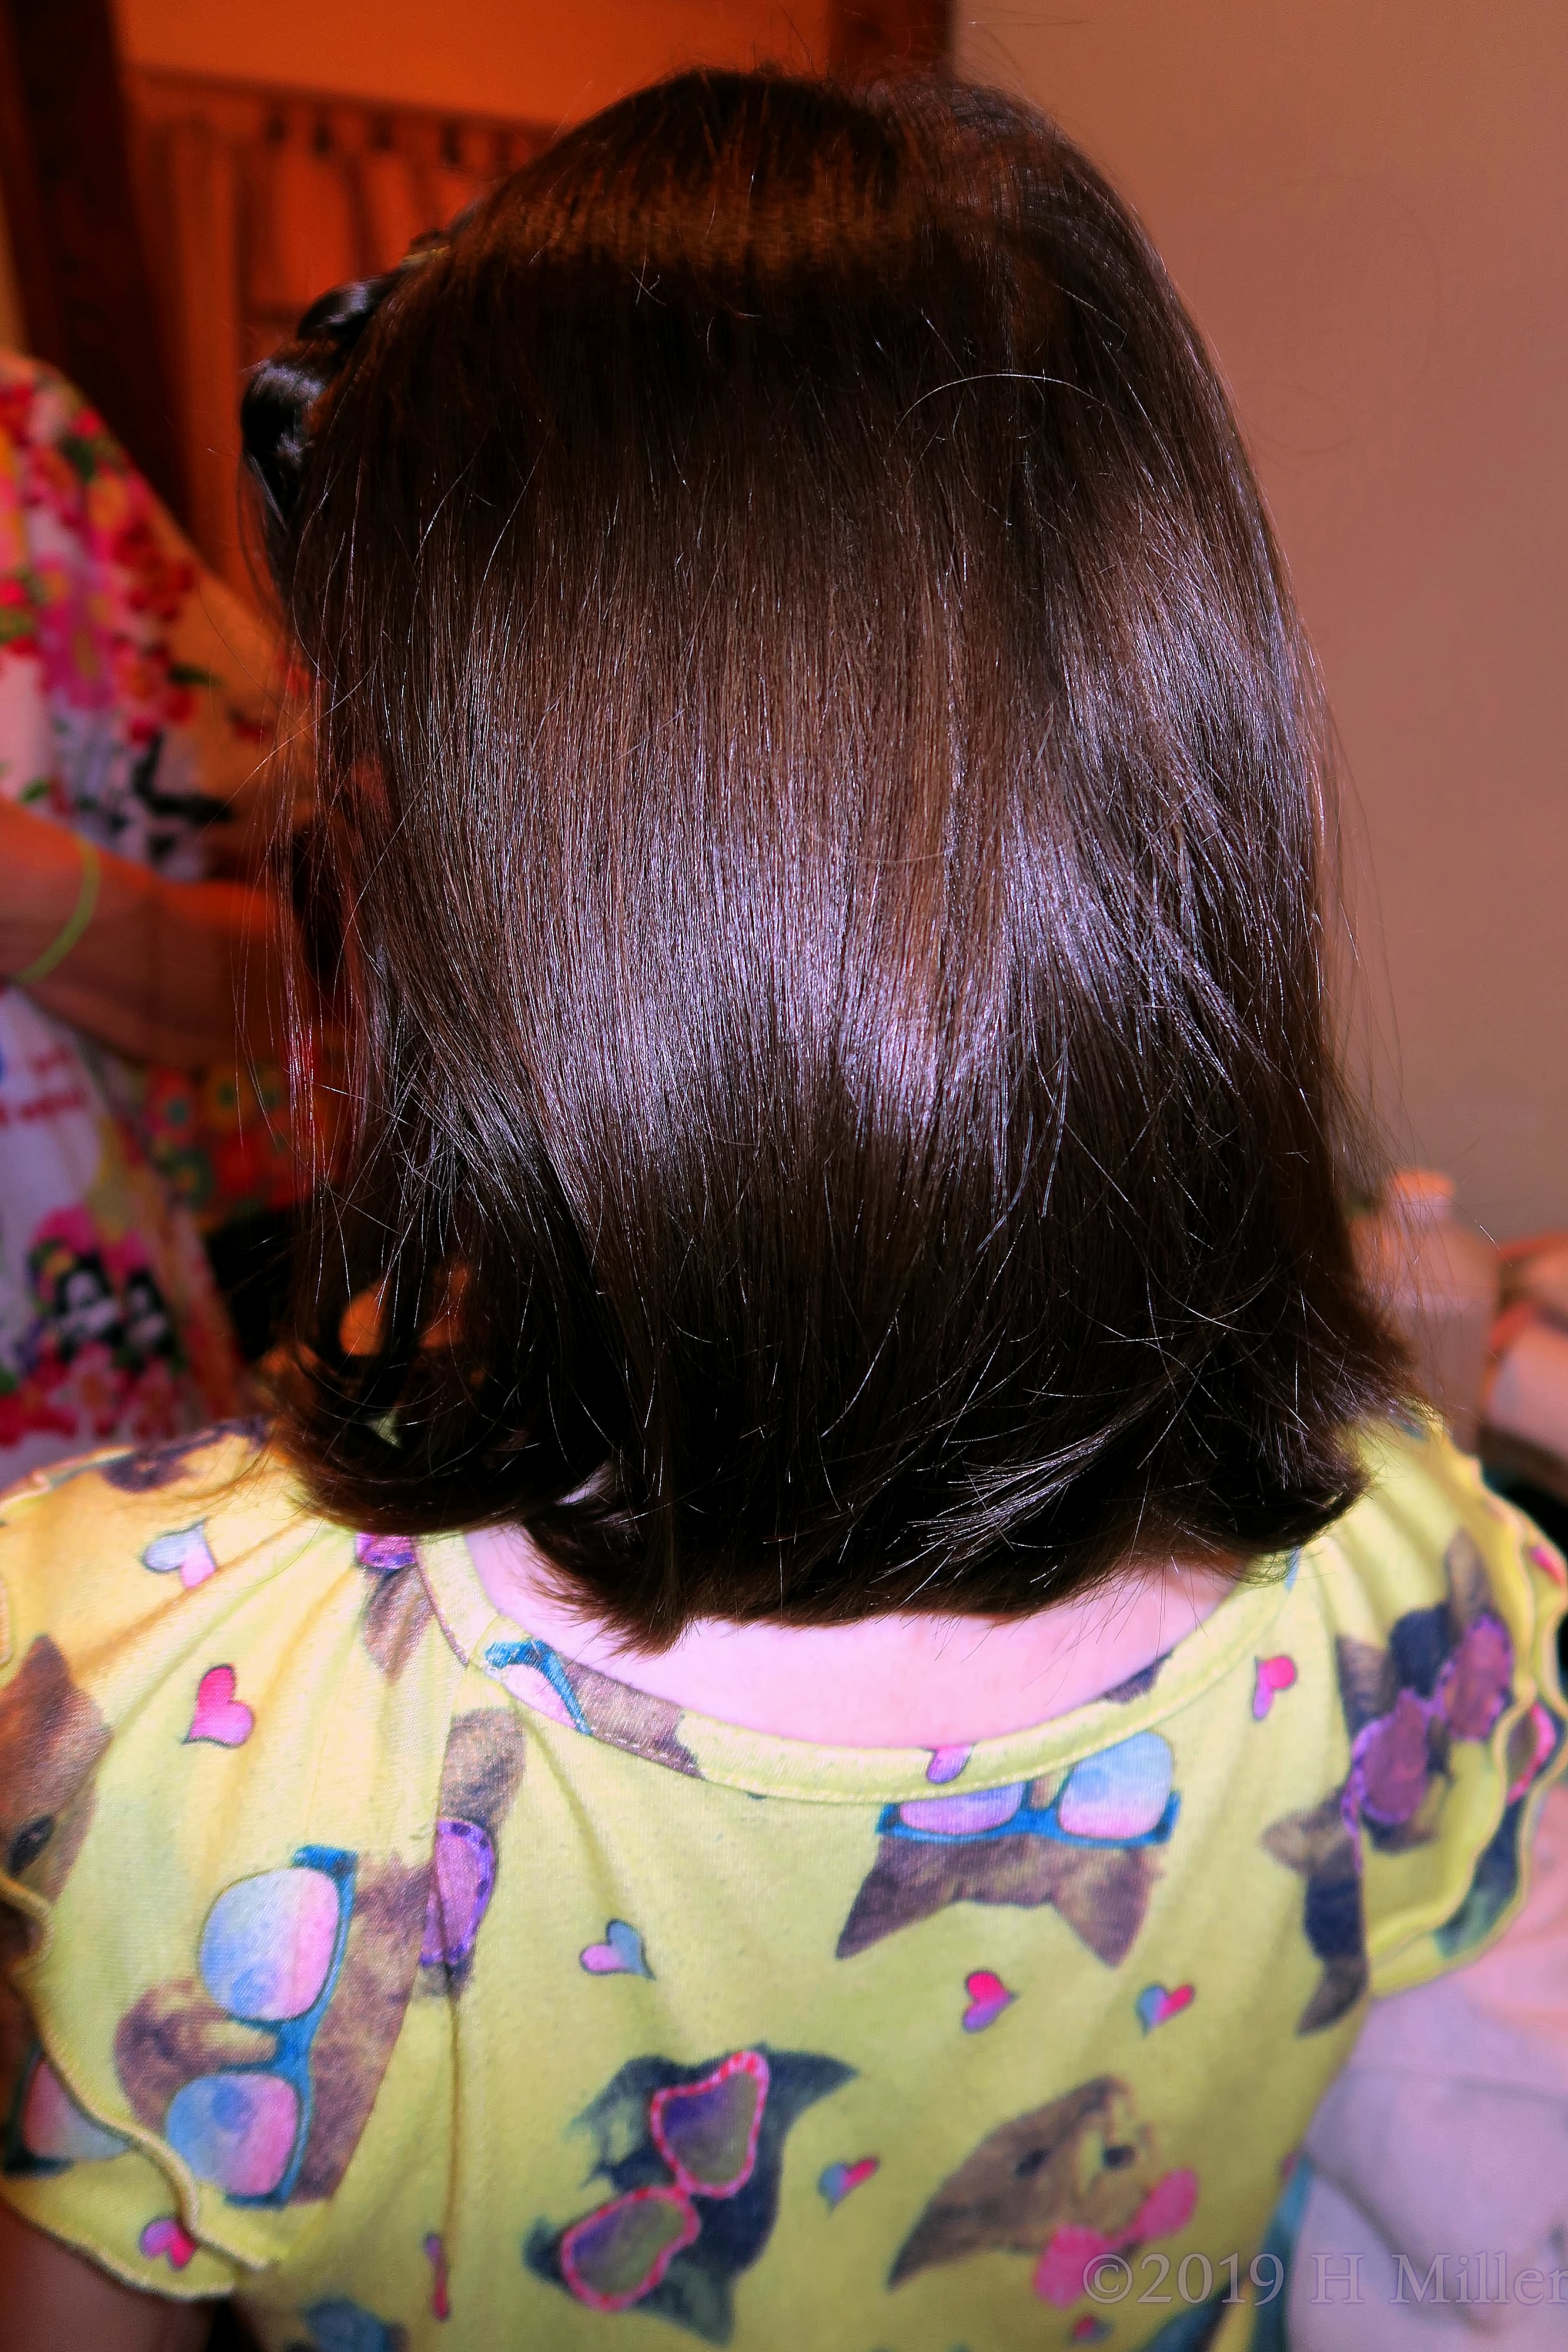 Sleek Shot Of Curls For Girls! Kids Hairstyle On This Girls Spa Party Guest! 4